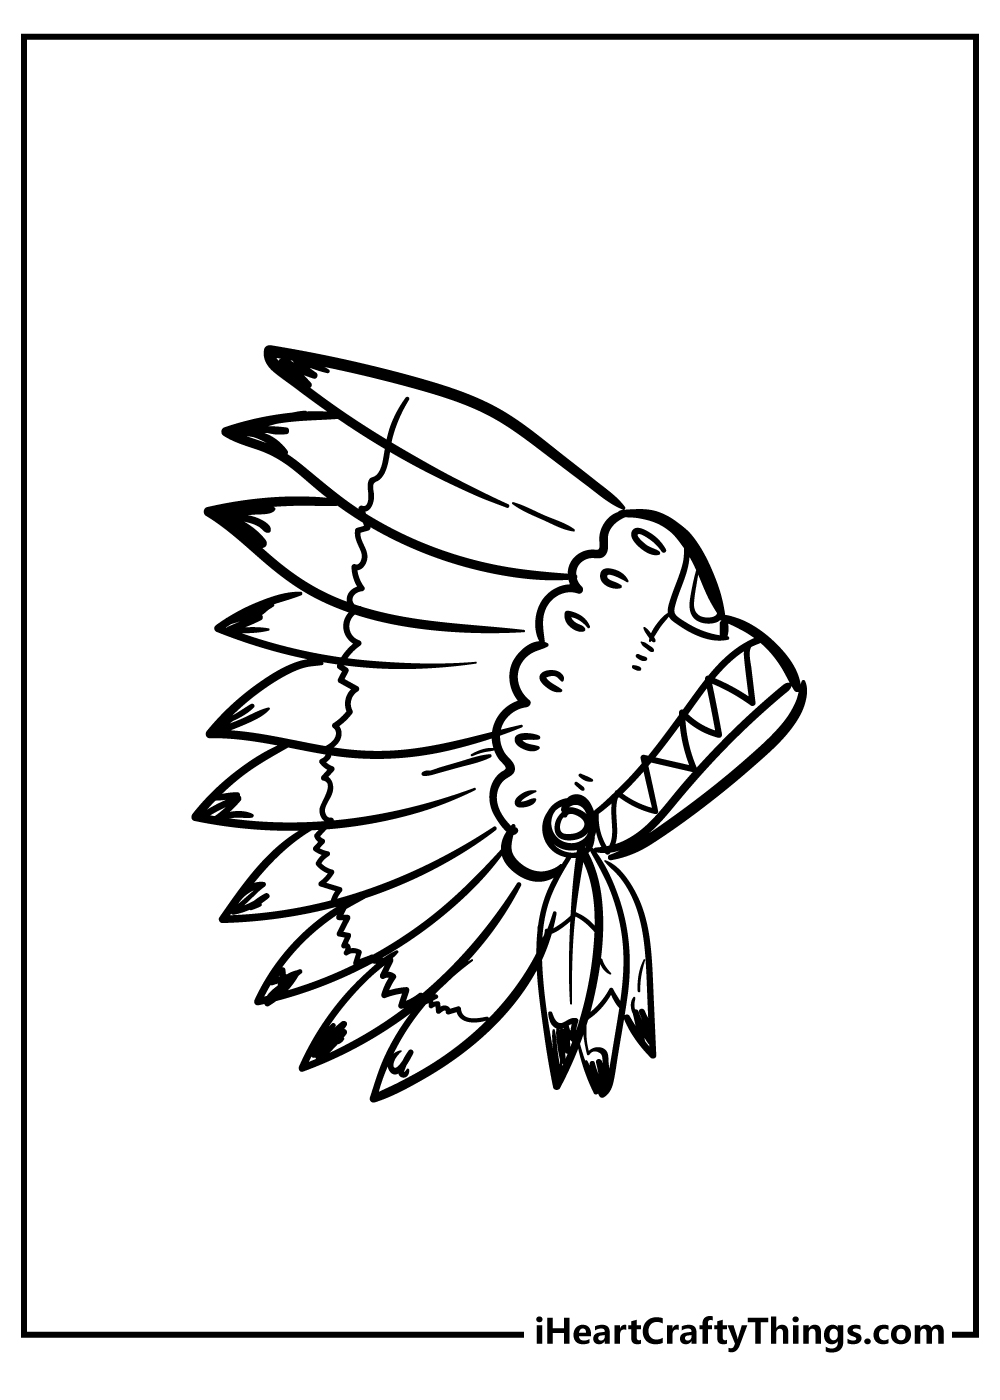 Native American Coloring Pages for adults free printable